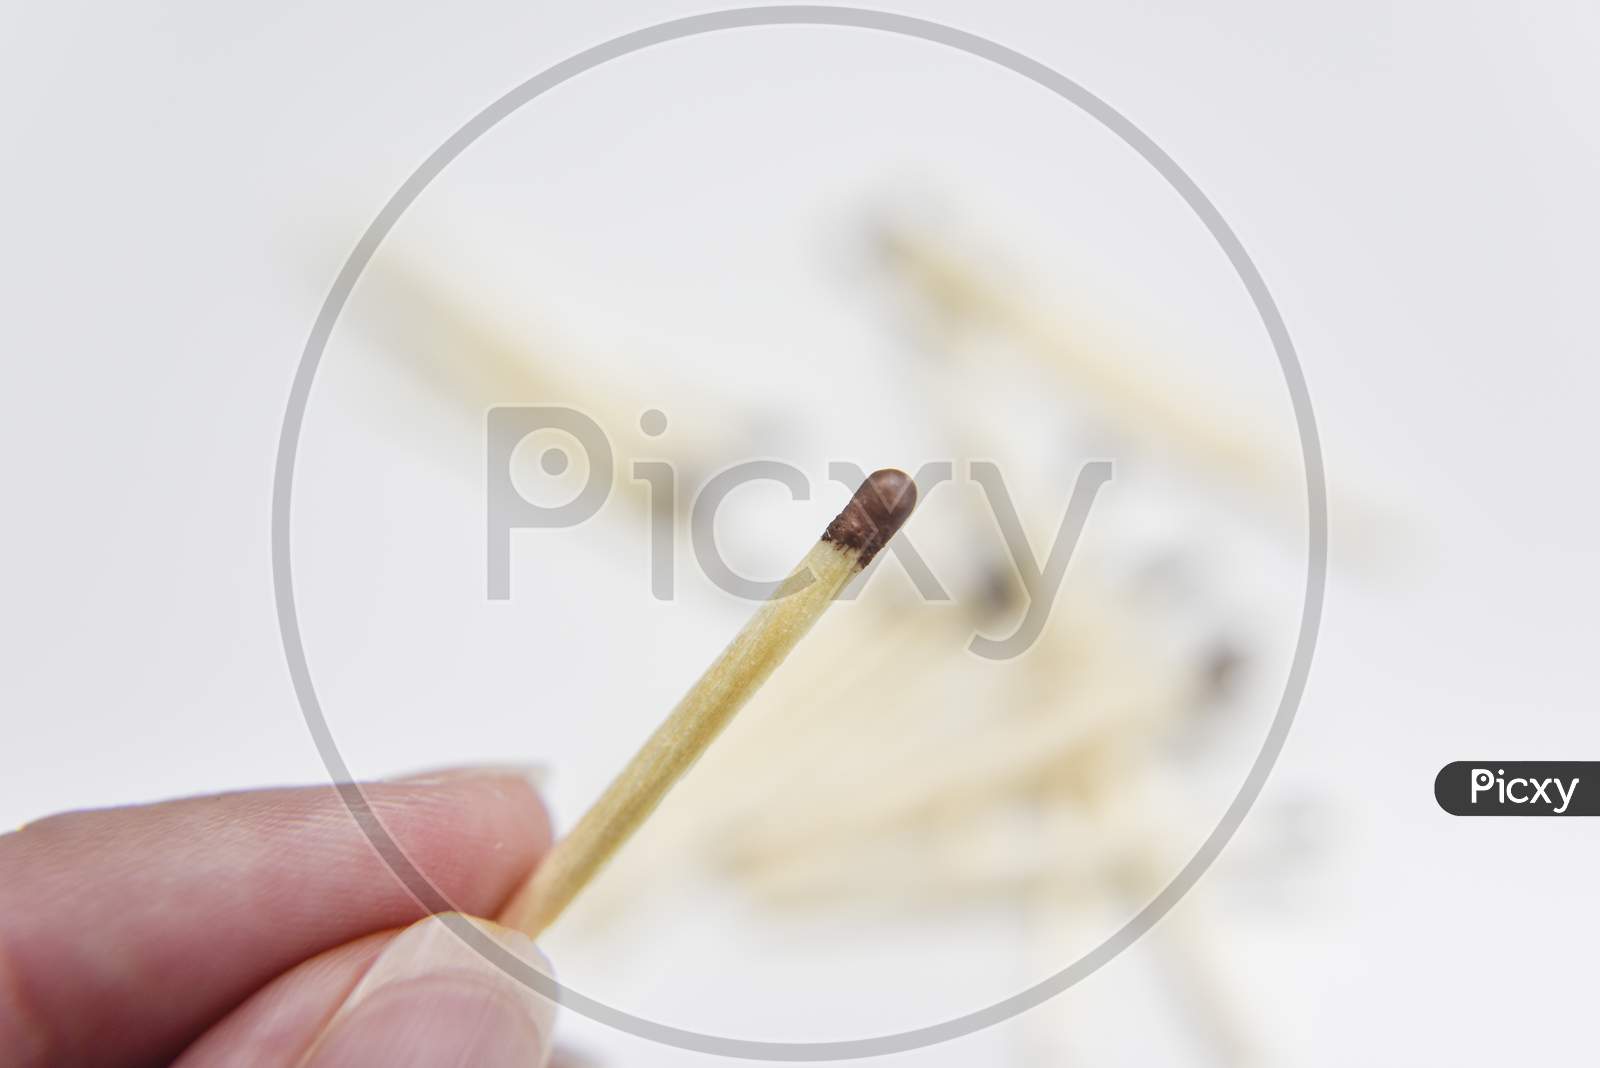 Wooden Match In The Hand With Matches On The White Backgtound. Selective Focus. Chain Reaction Concept.